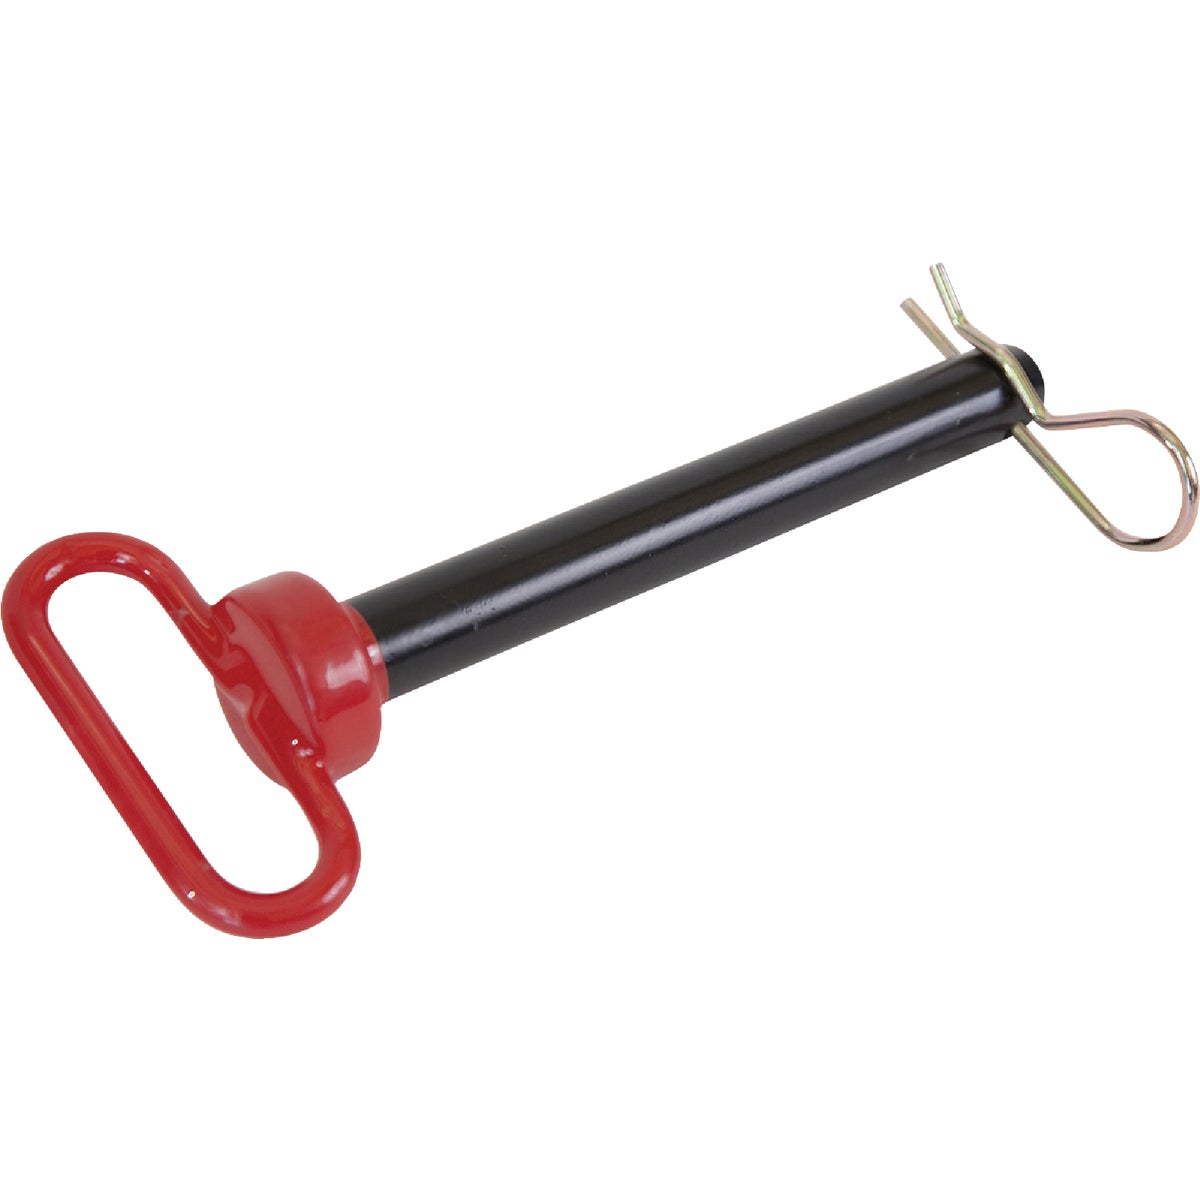 Item 736975, Vinyl coated handle hitch pin with hair pin.